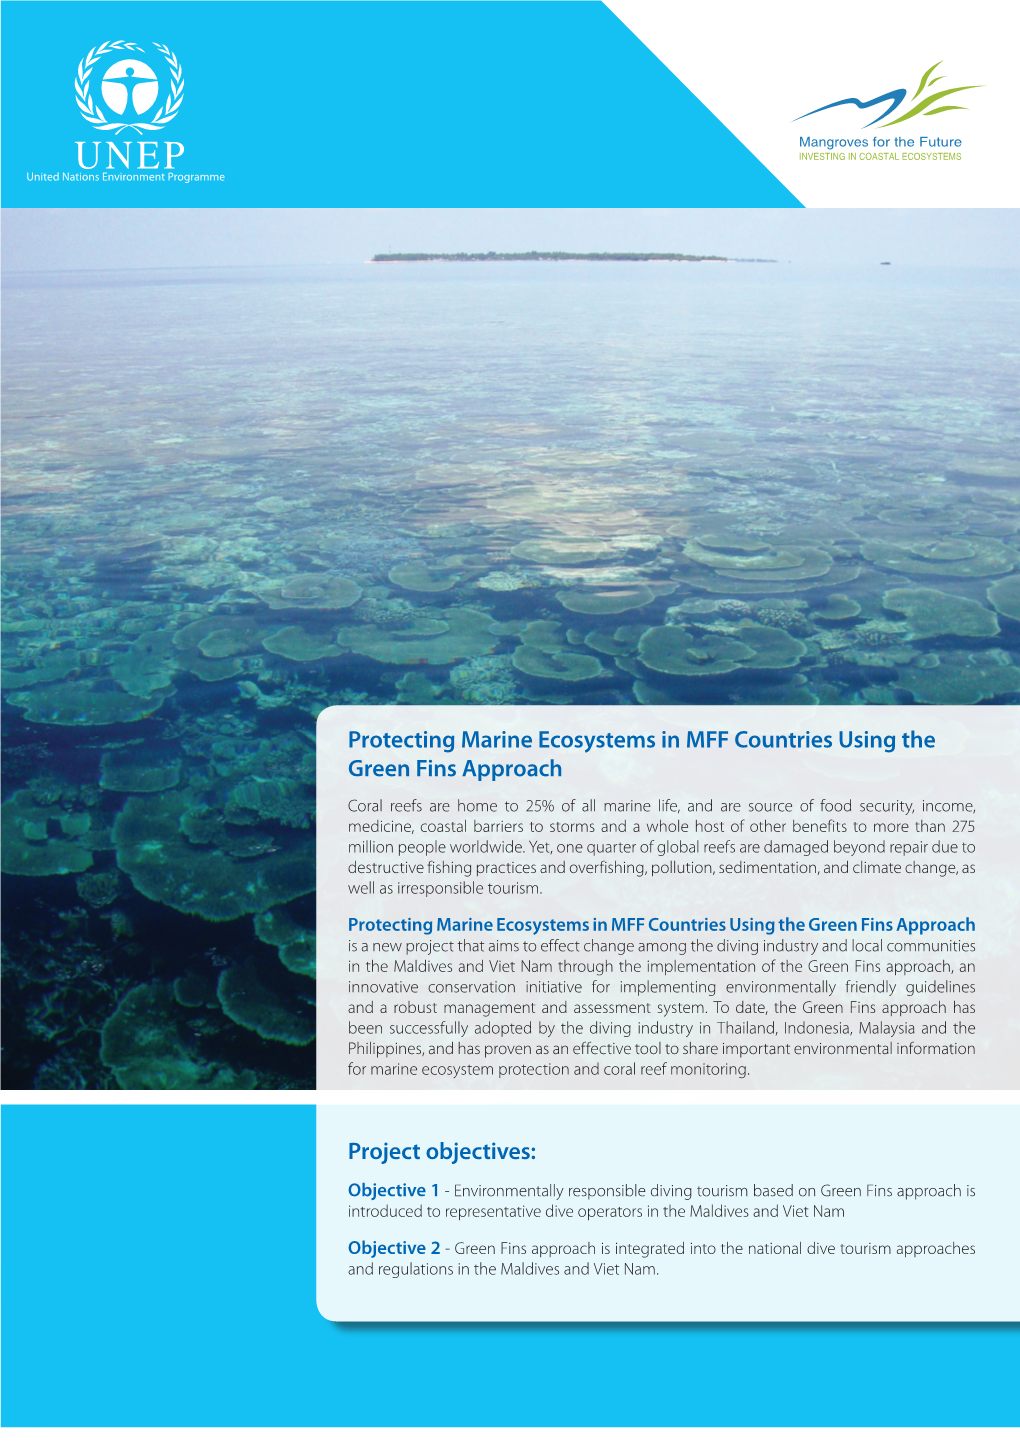 Protecting Marine Ecosystems in MFF Countries Using the Green Fins